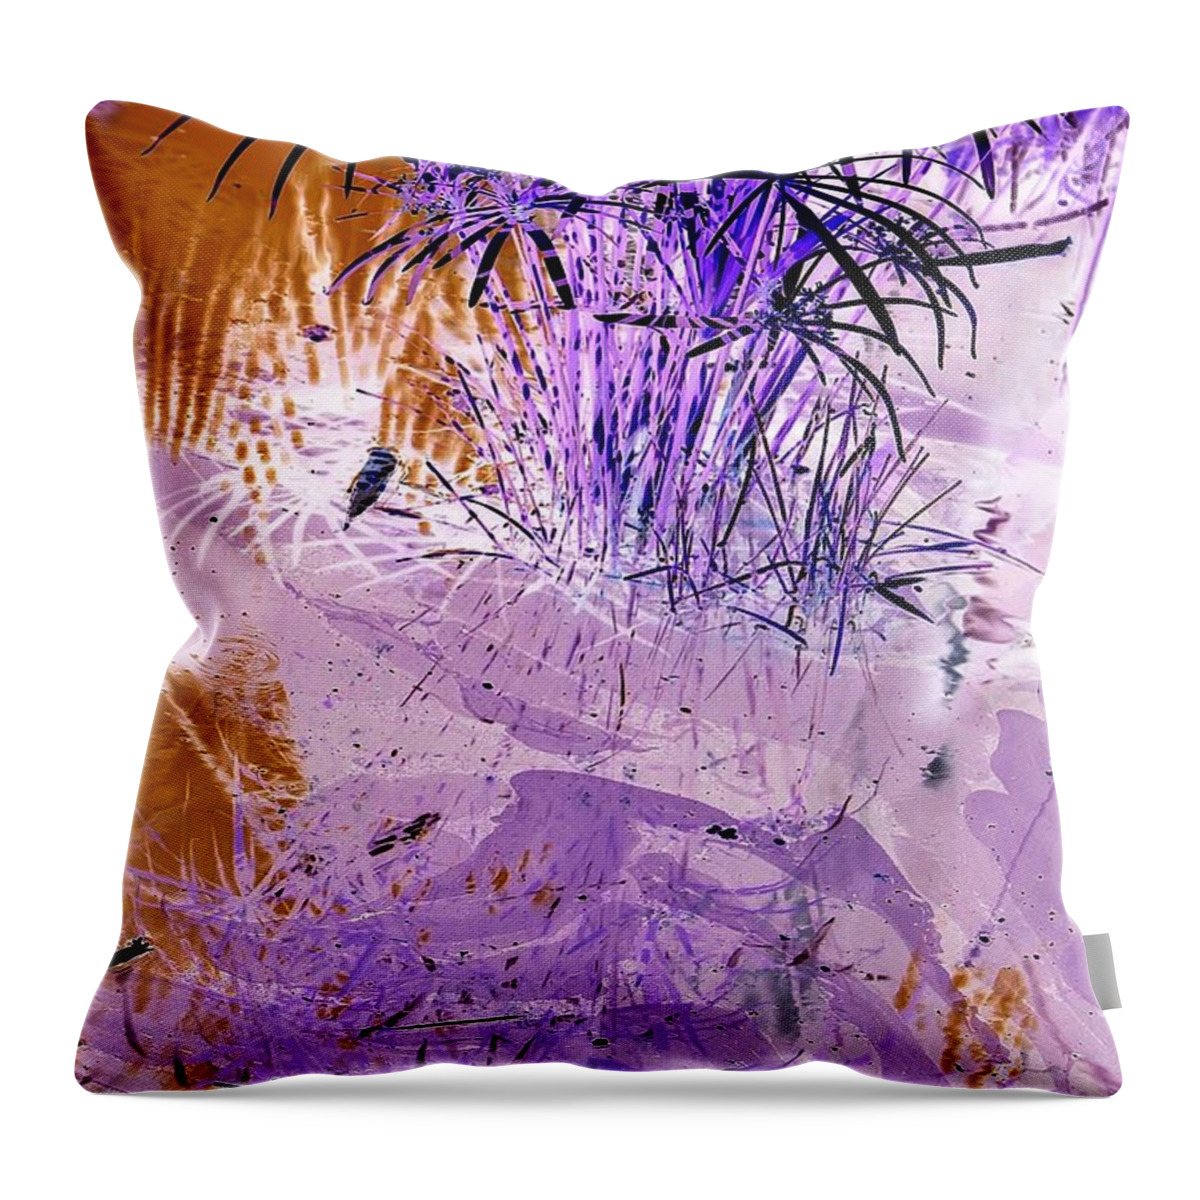 Surreal-nature-photos Throw Pillow featuring the digital art Pool Party I.C. by John Hintz